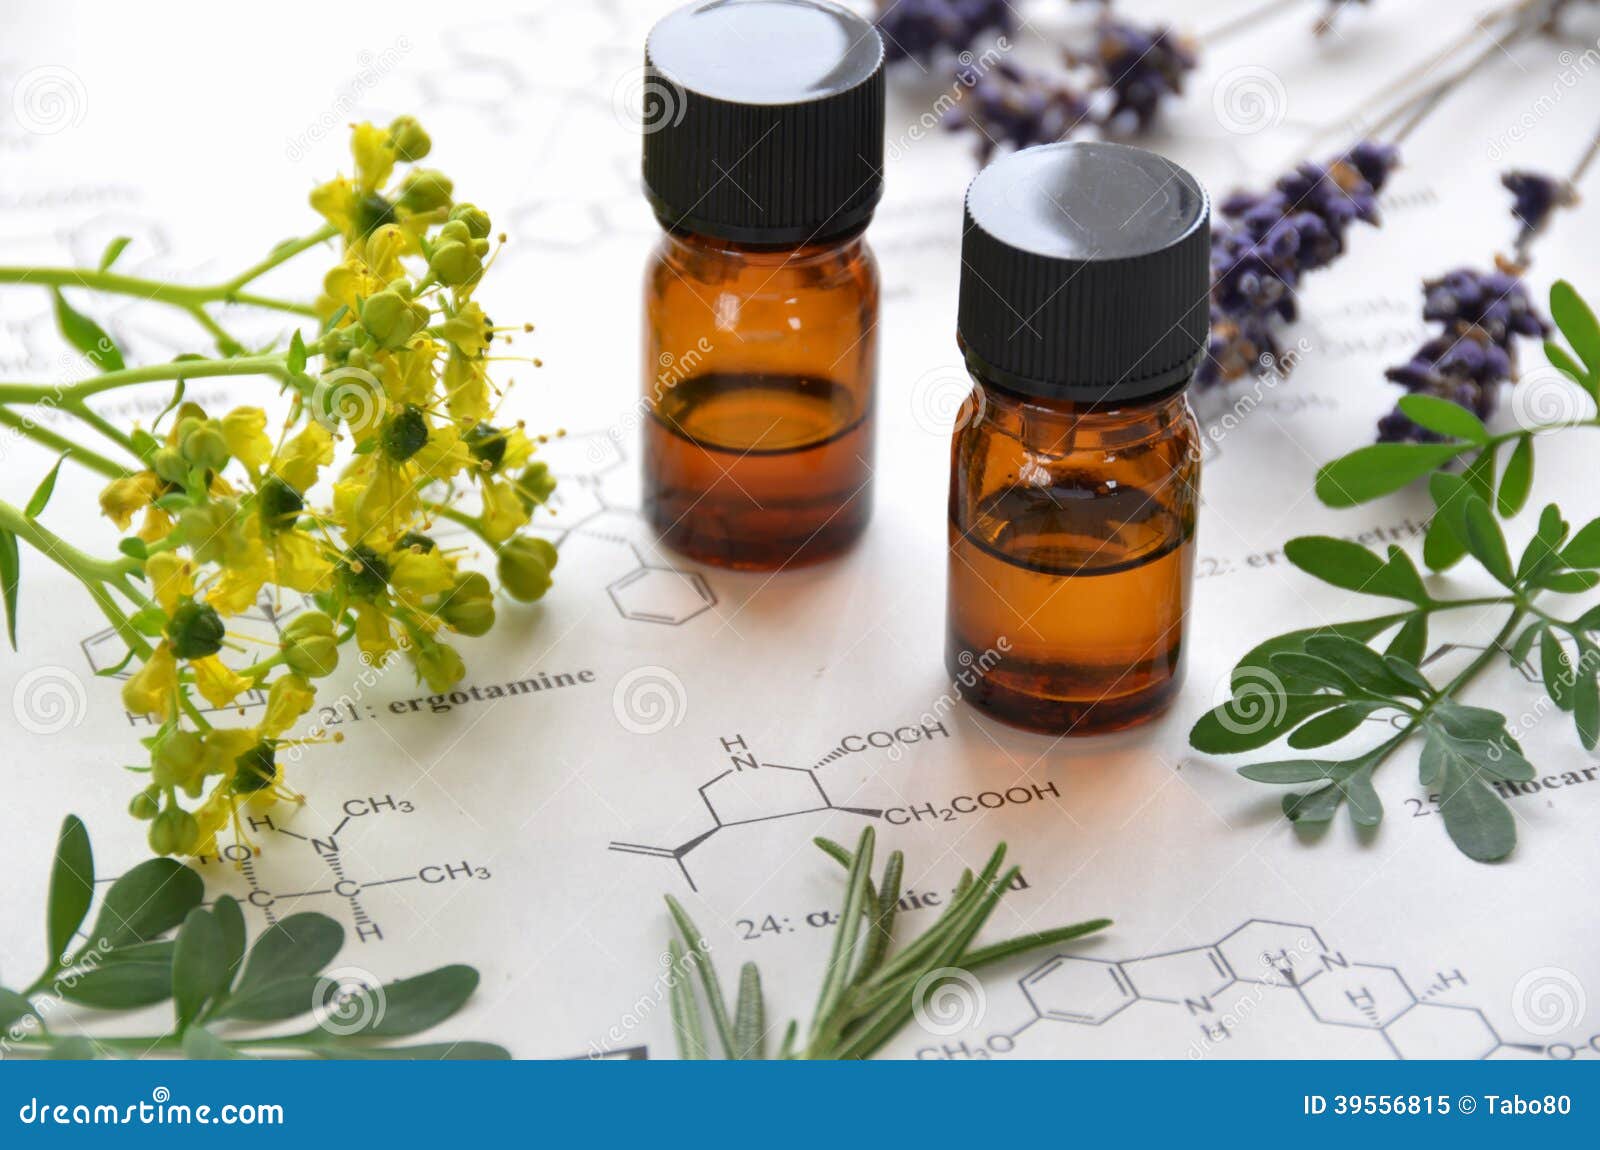 essential oils and science